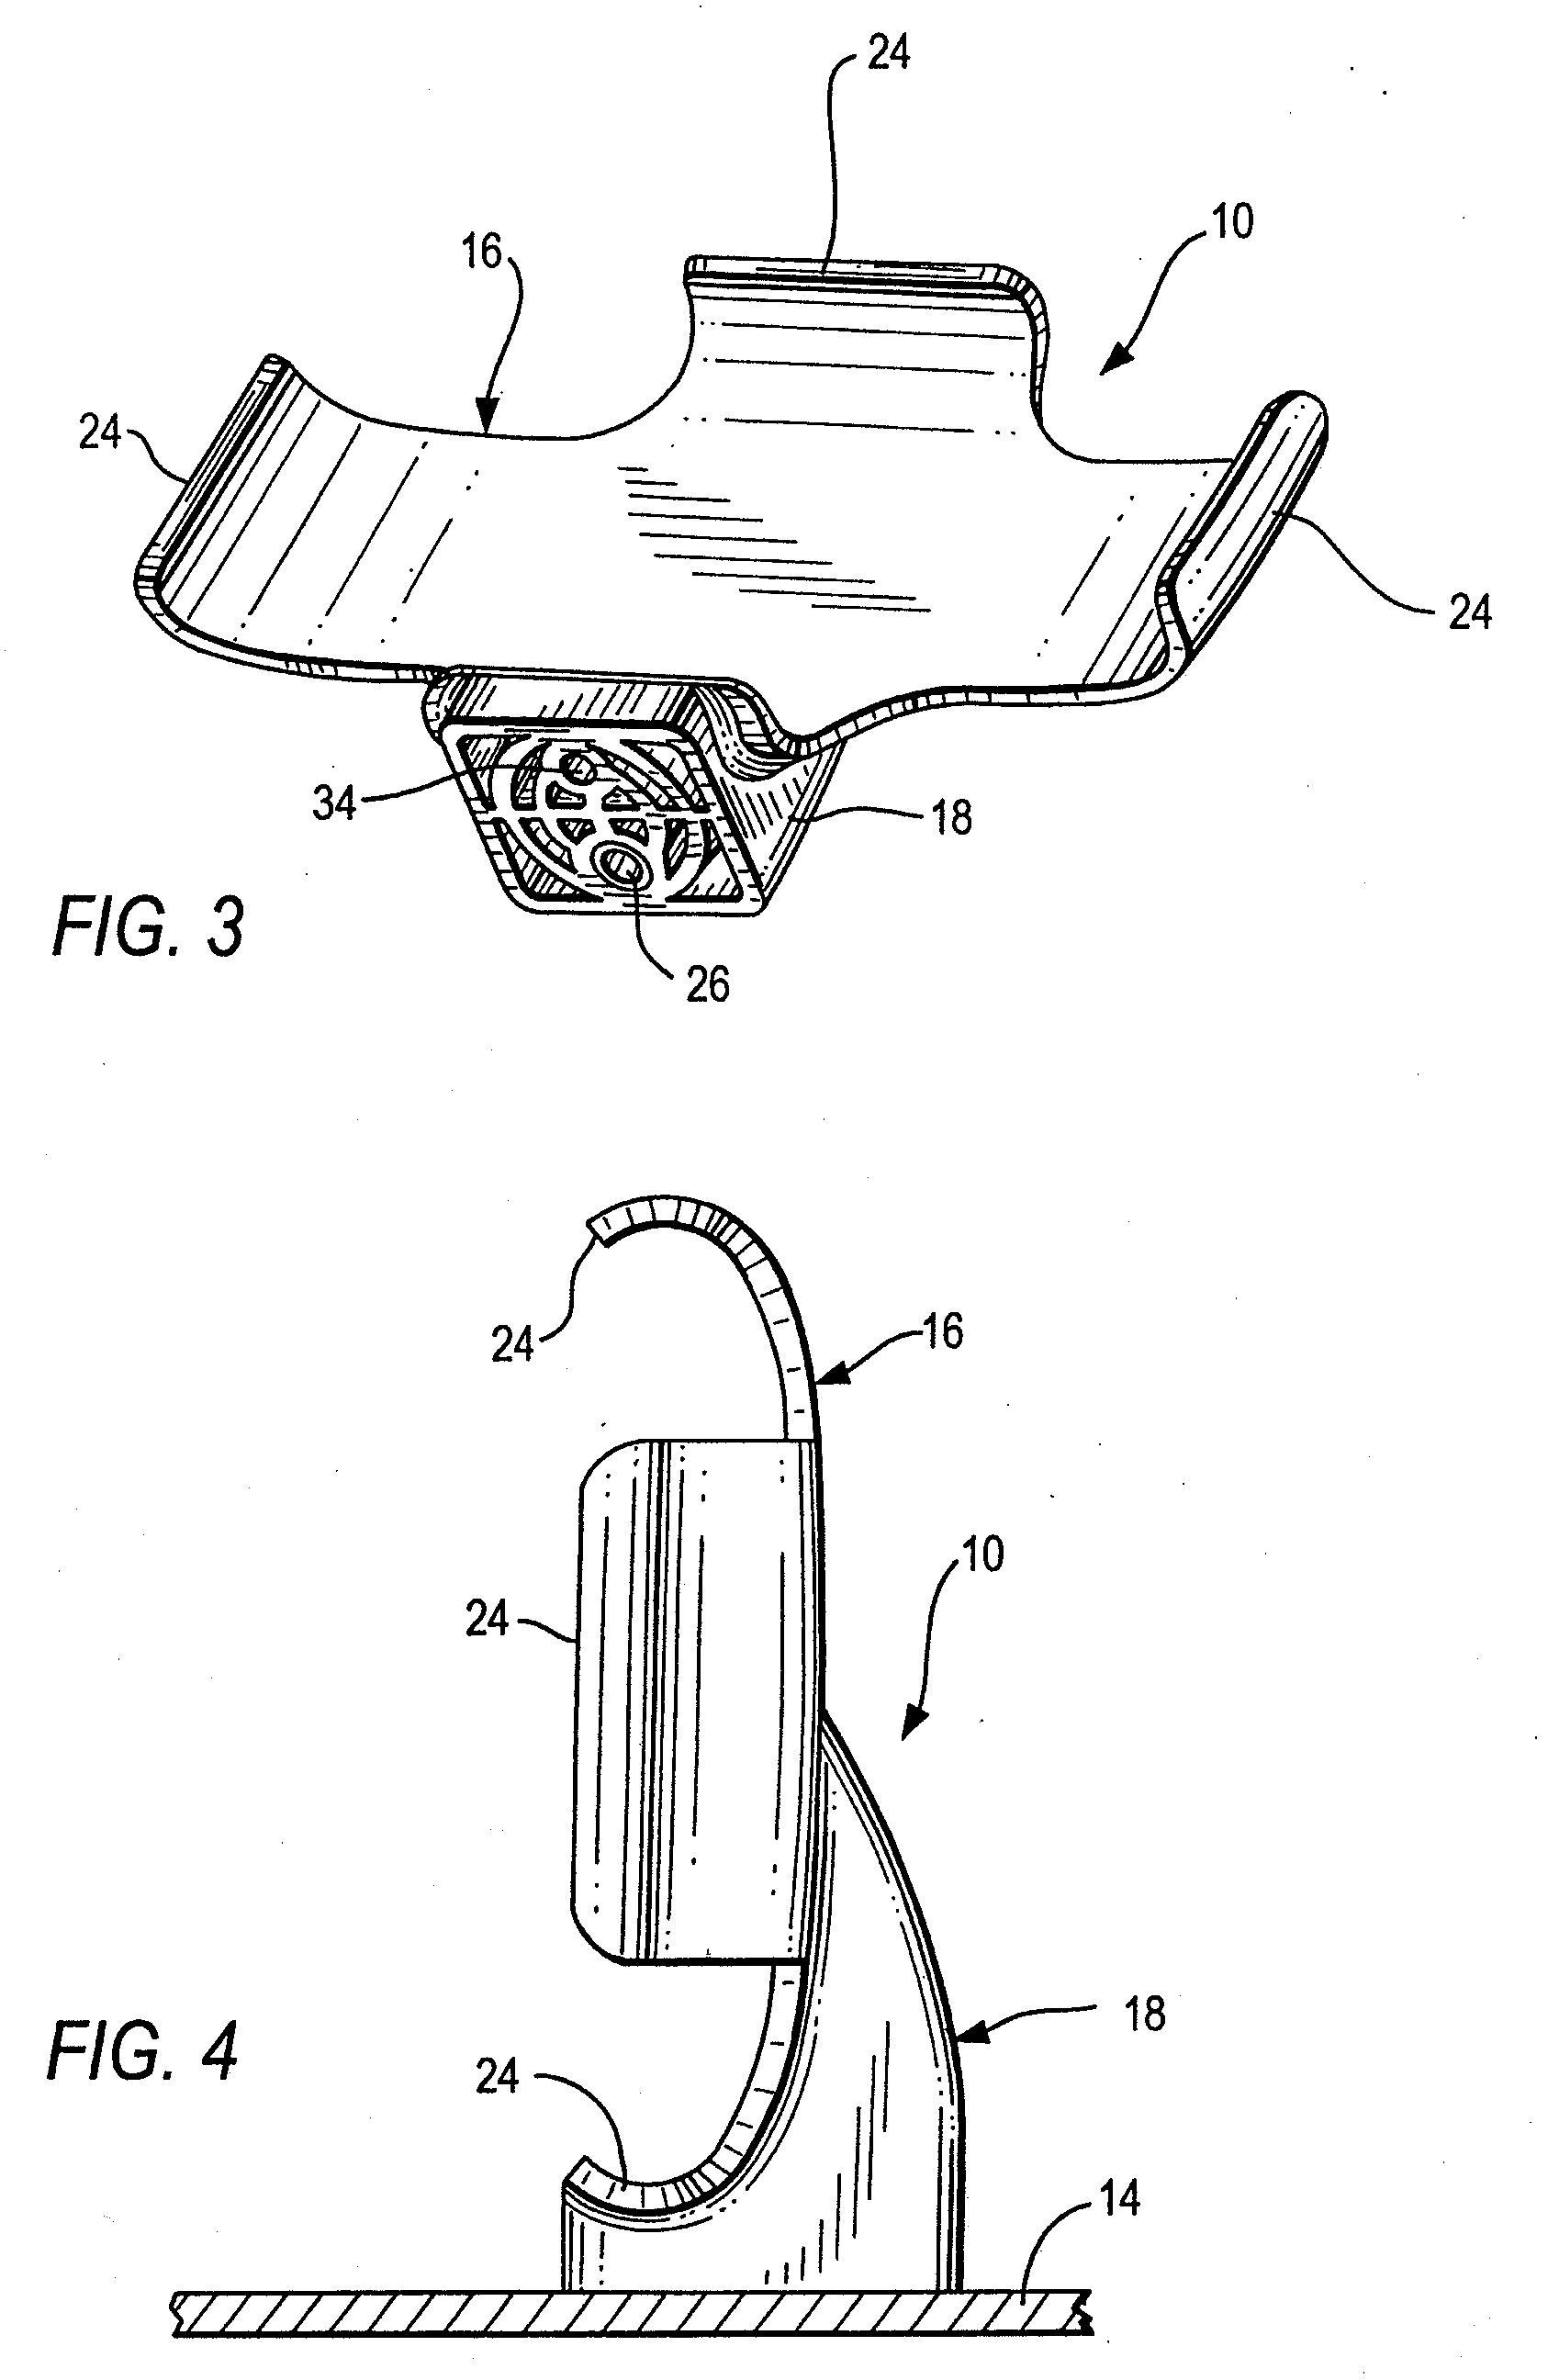 Weighted mounting arrangement for, and method of, steadily supporting a motion-sensitive, image capture device